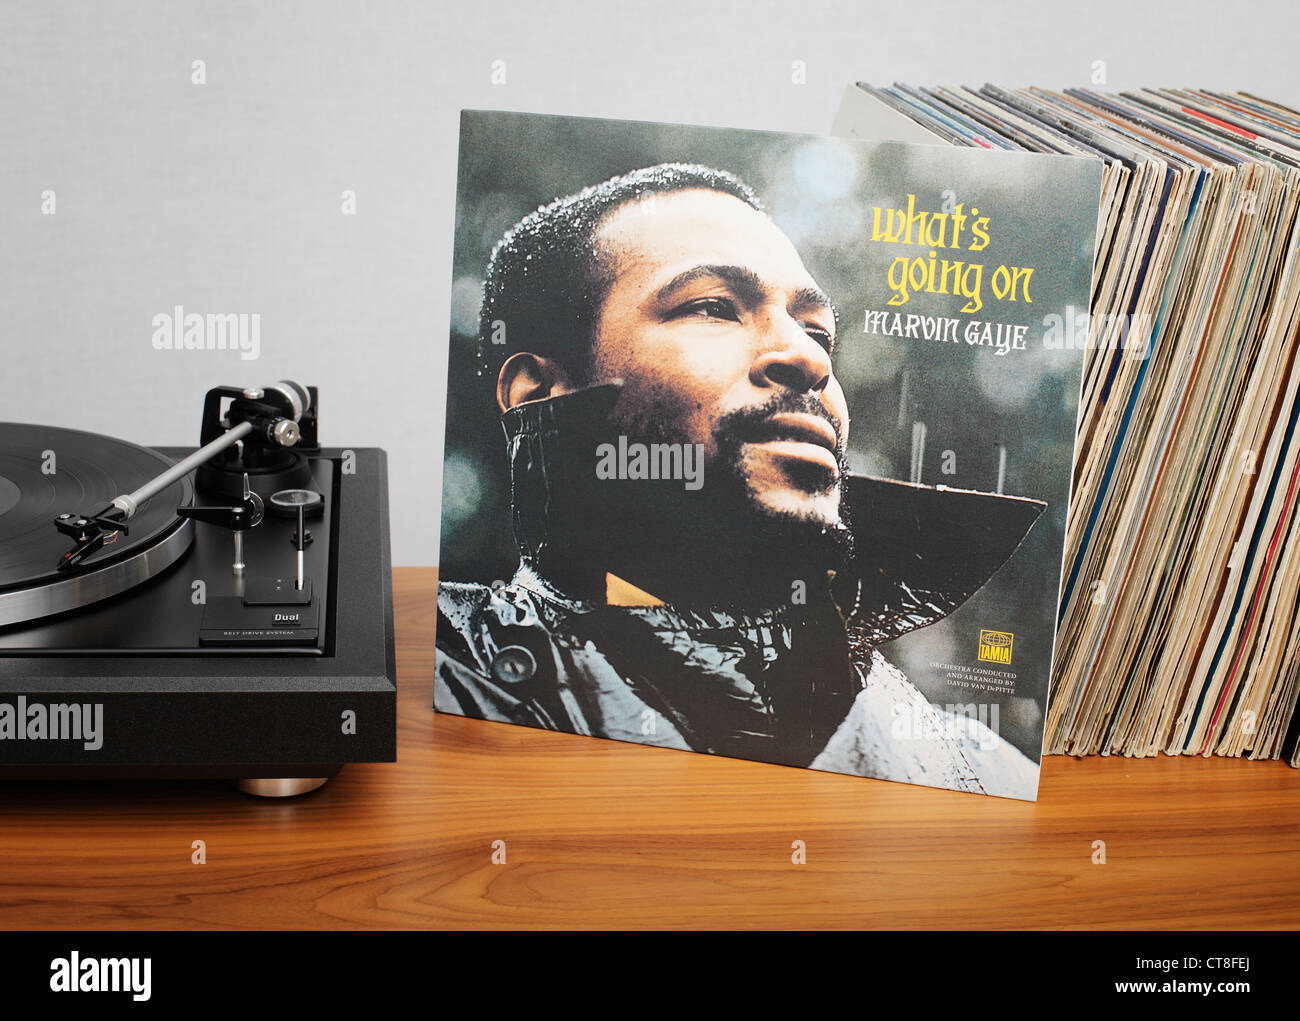 What's Going On is the eleventh studio album by soul musician Marvin Gaye. Stock Photo